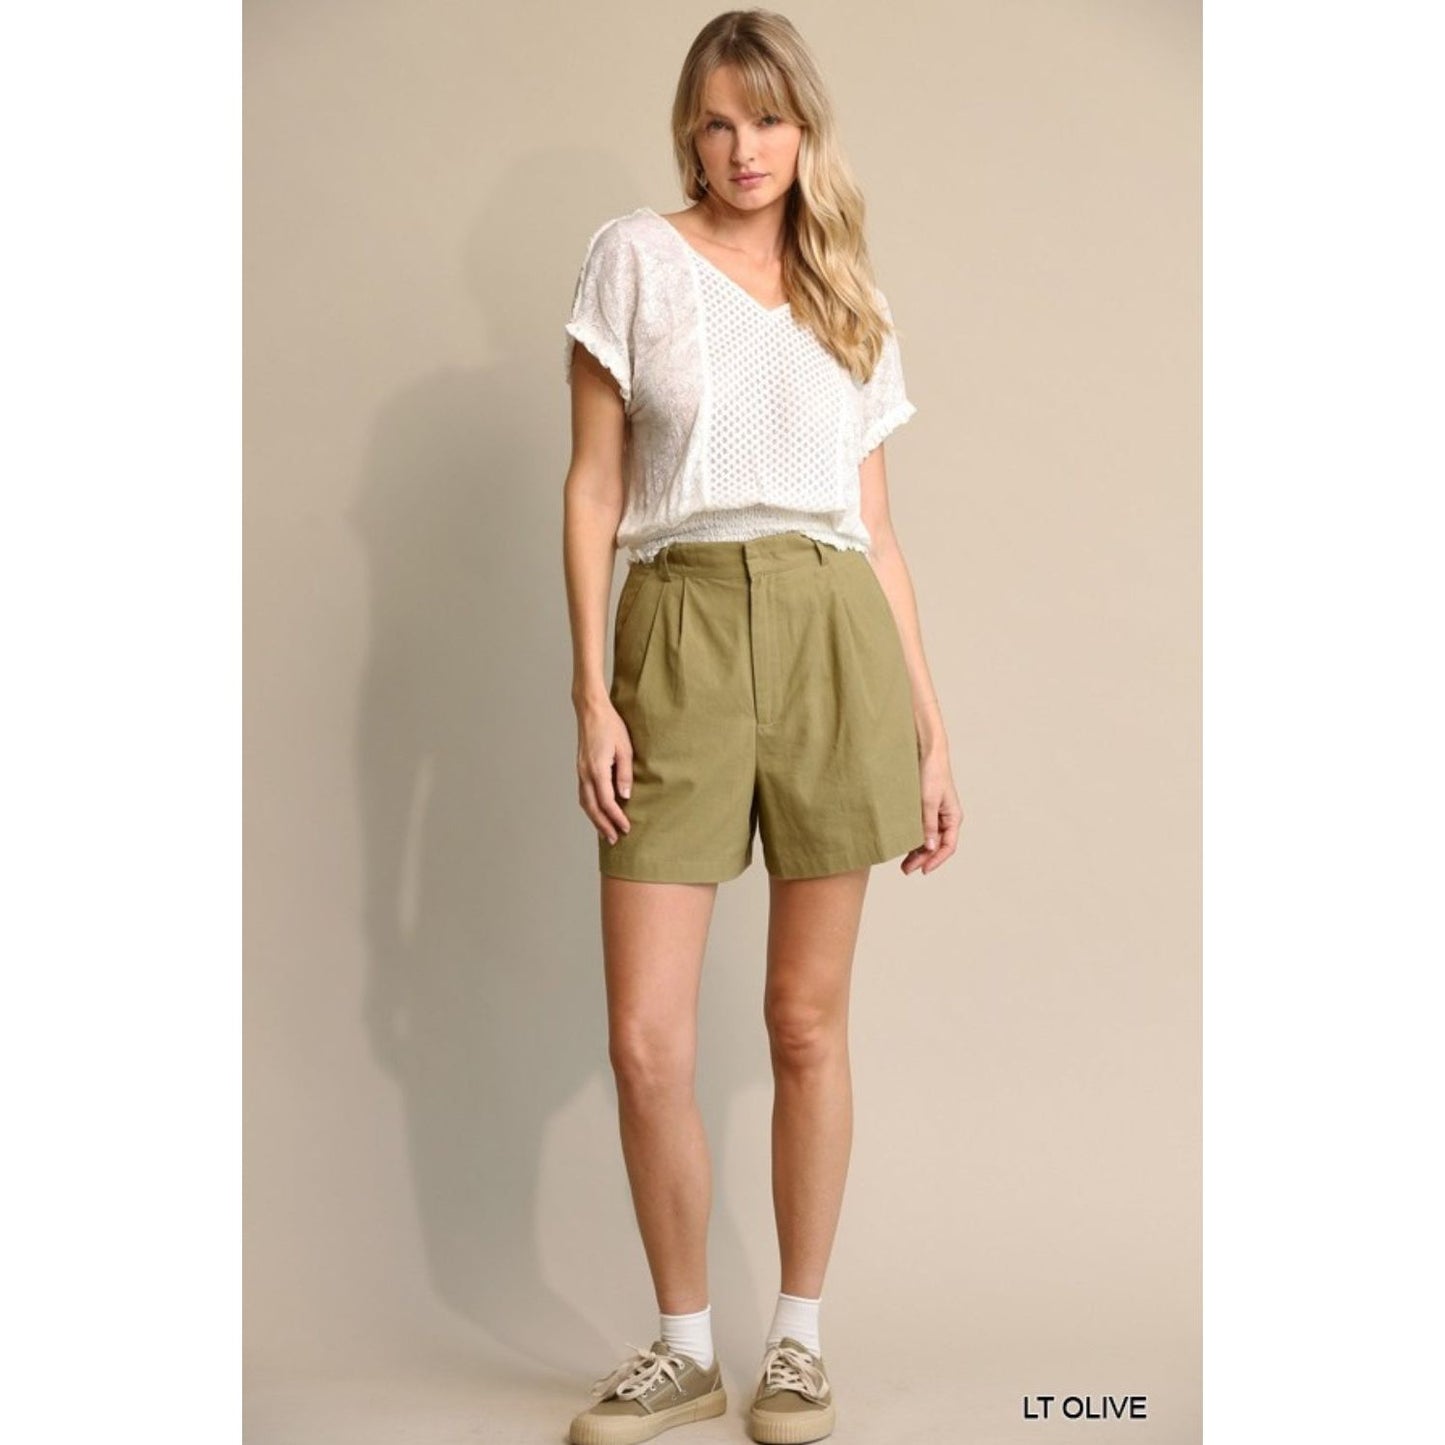 Gigio tailored mid-length shorts ,  sizes Small through Large. 100% Cotton.  Olive